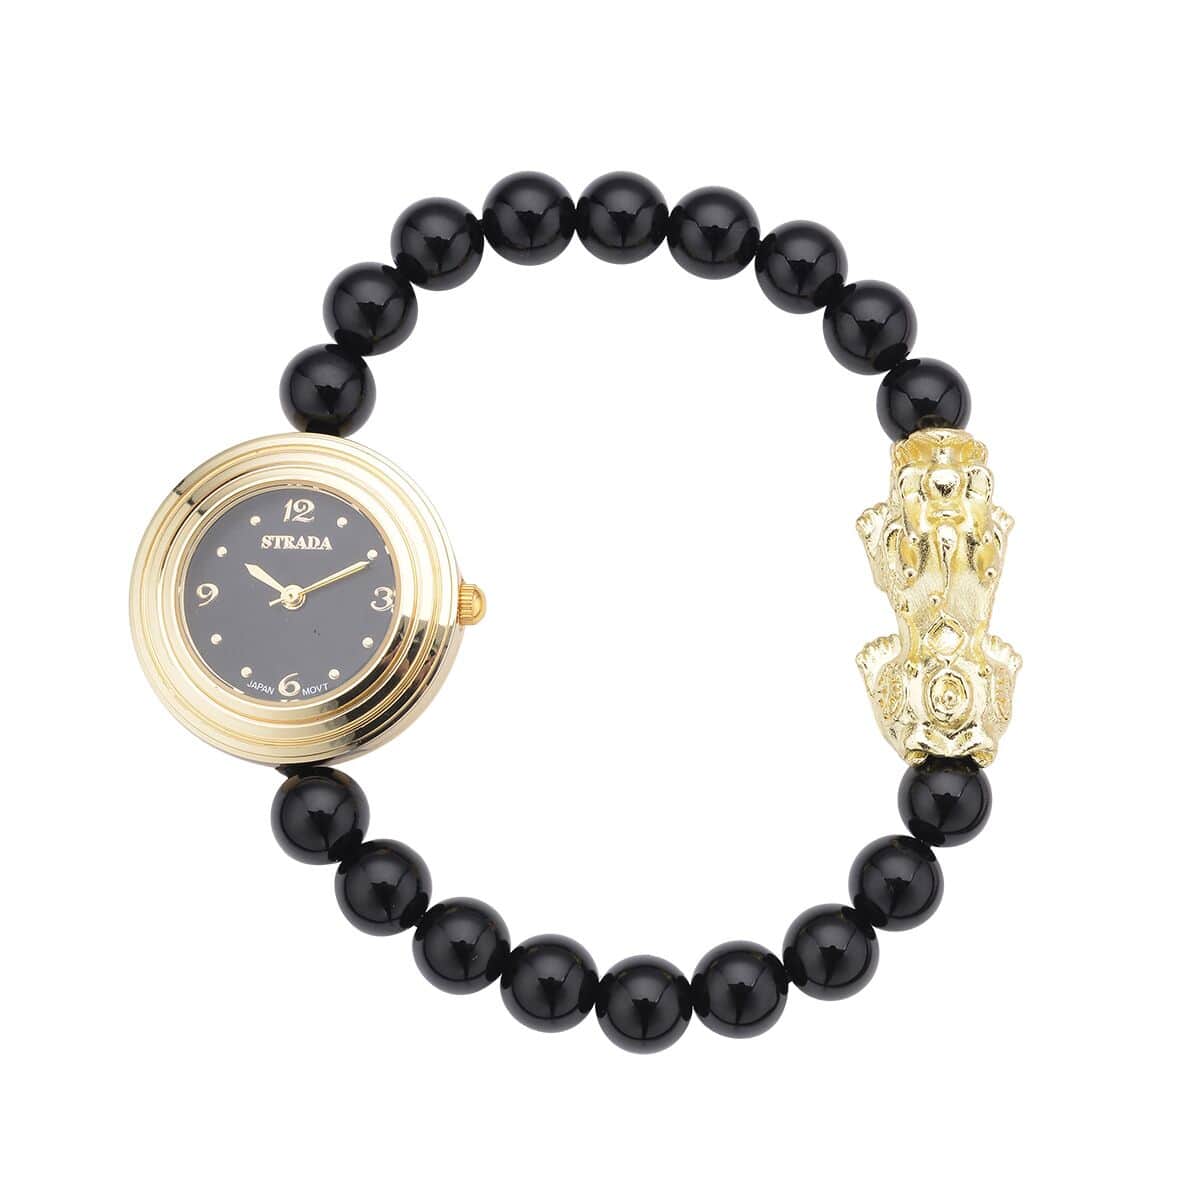 Strada Japanese Movement Black Agate Beaded Stretch Bracelet Watch for Women with Feng Shui Pi-xiu Charm (7.0-7.5In) (28.20mm) 85.00 ctw | Women Watch | Quartz Watch | Ladies Watch image number 0